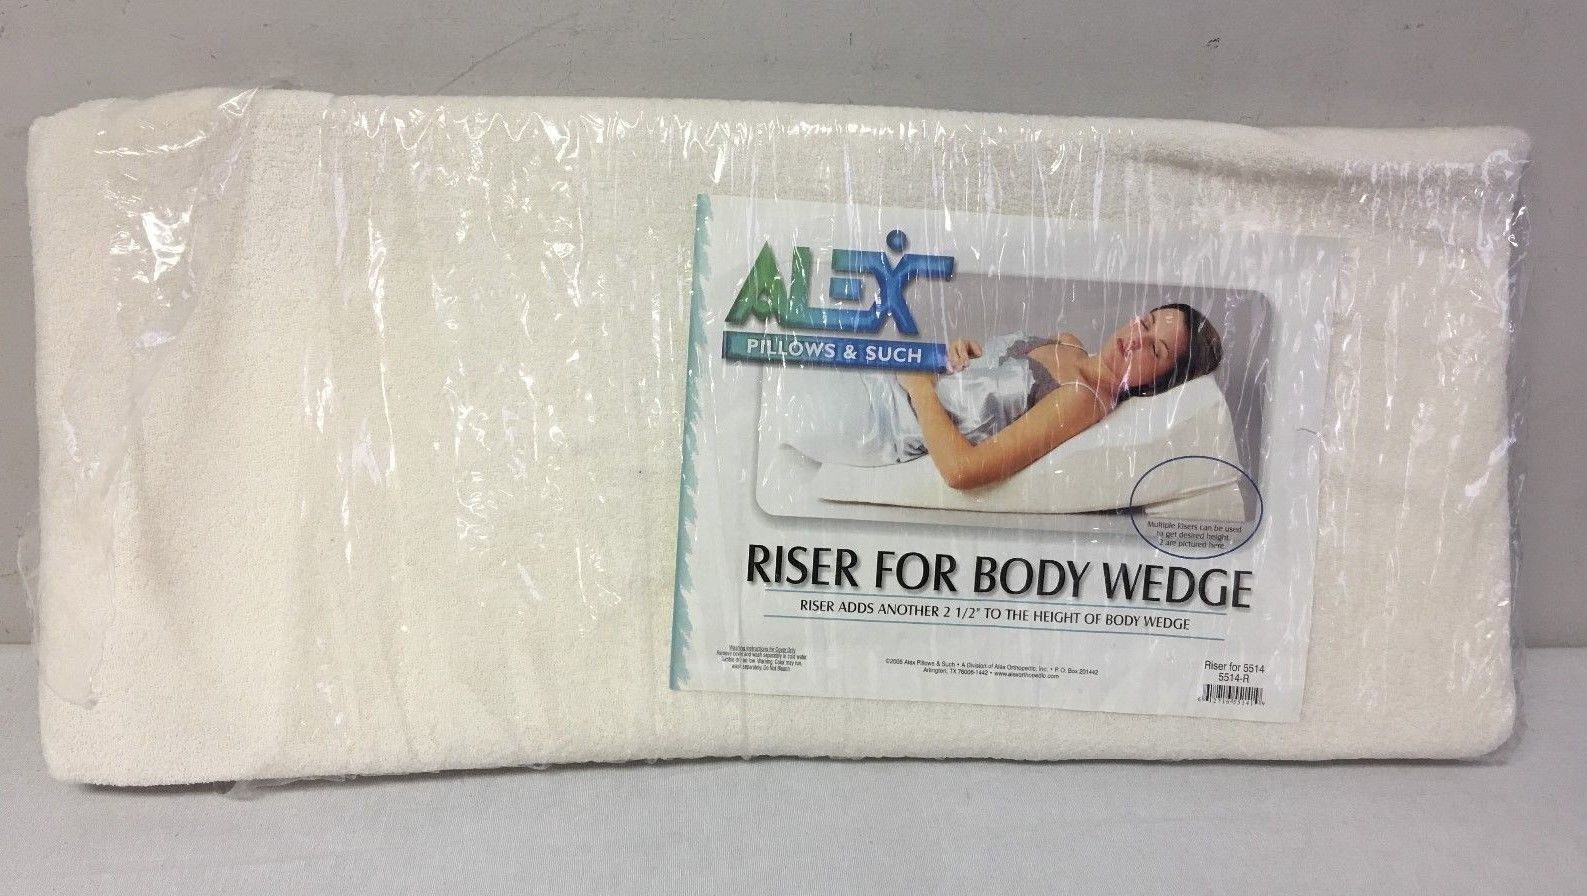 Riser For Body Wedge 24" X 12" X 2.5" - $43.48